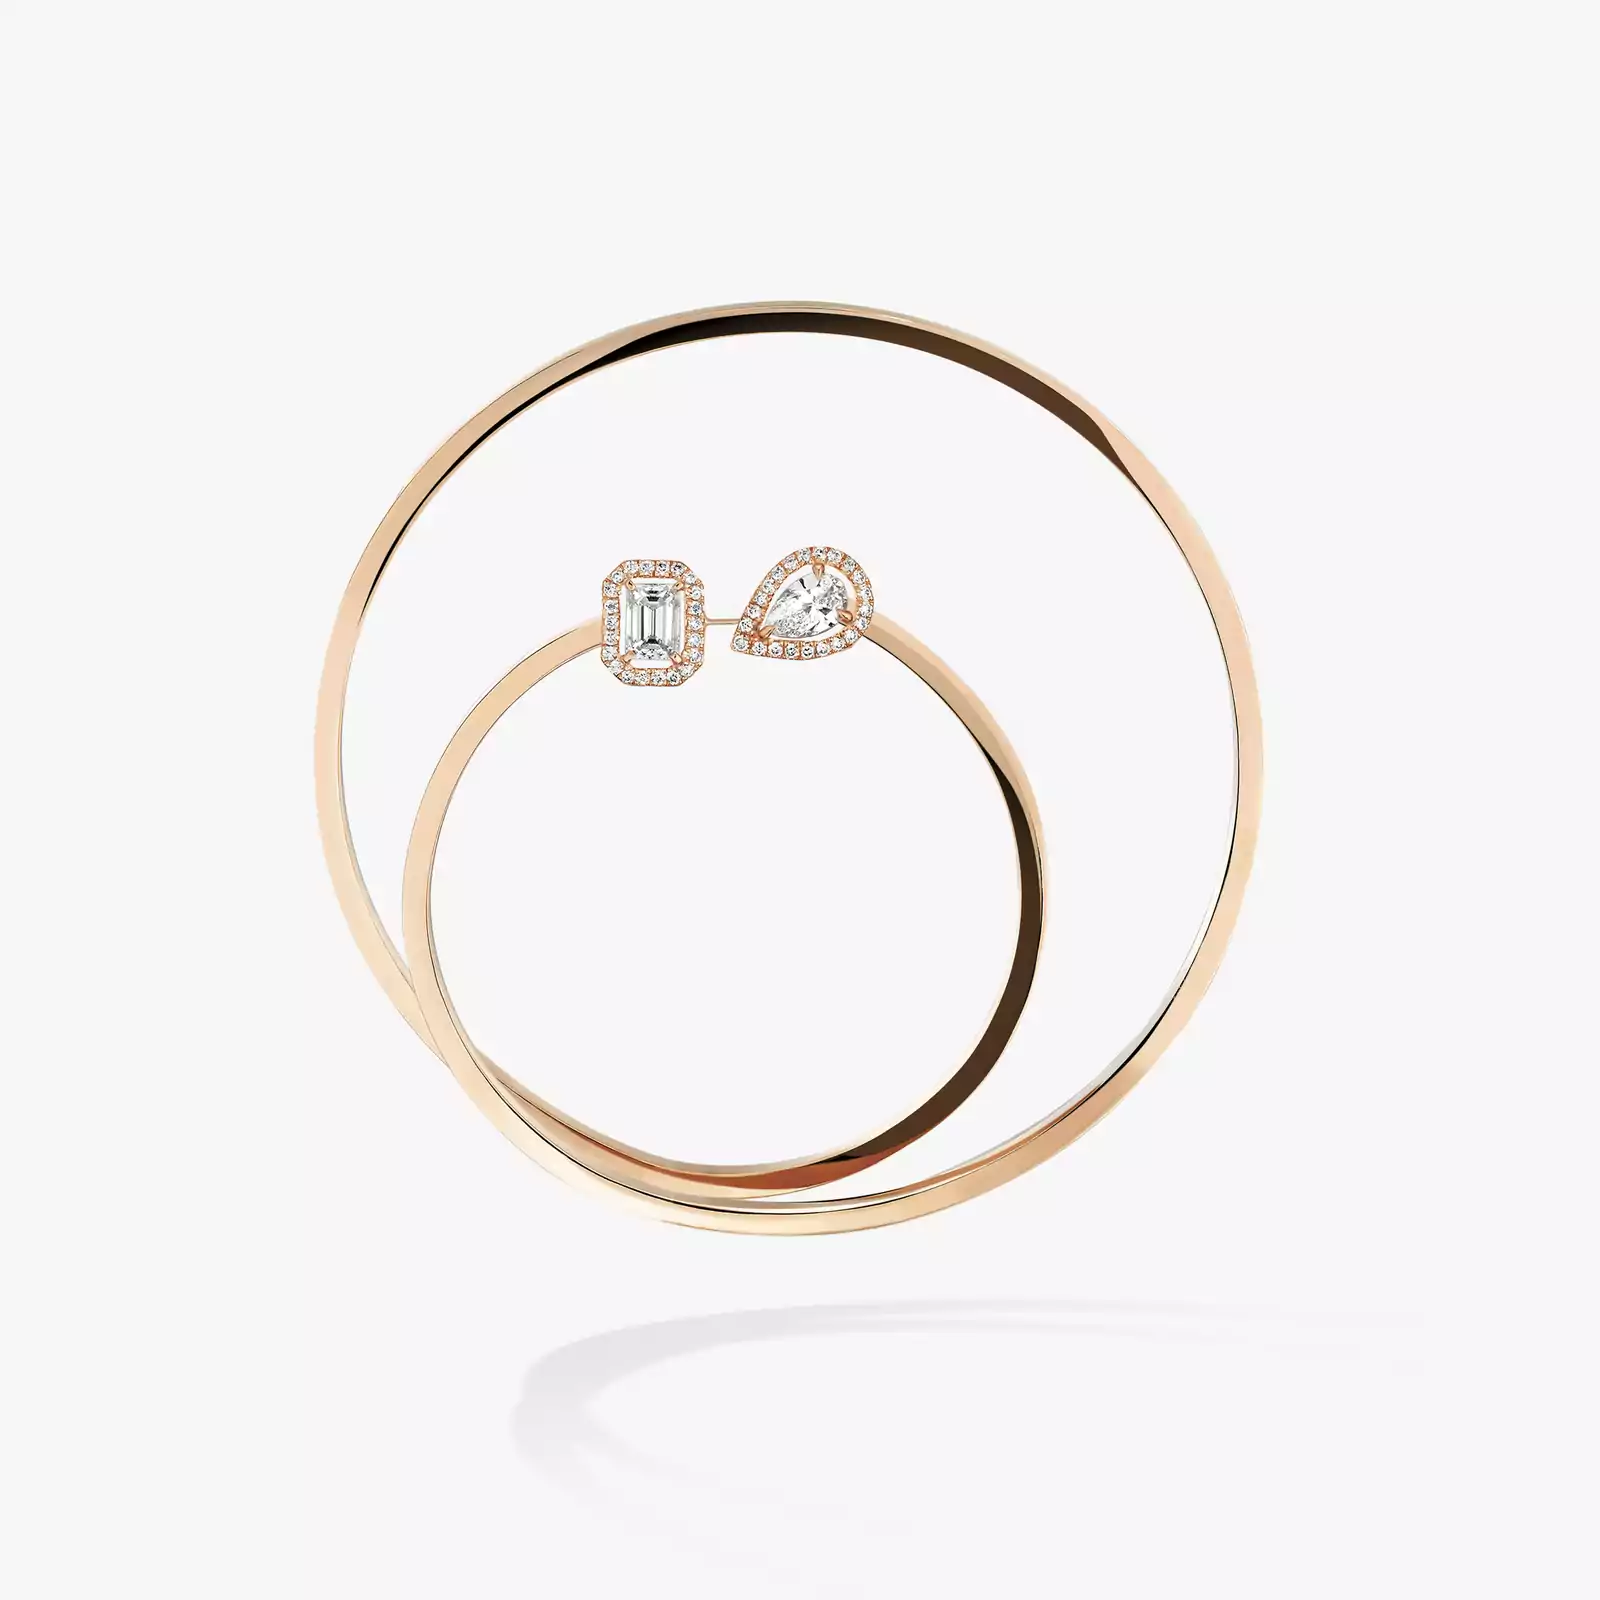 Earrings For Her Pink Gold Diamond My Twin Mono Hoop 2x0.10ct 07445-PG